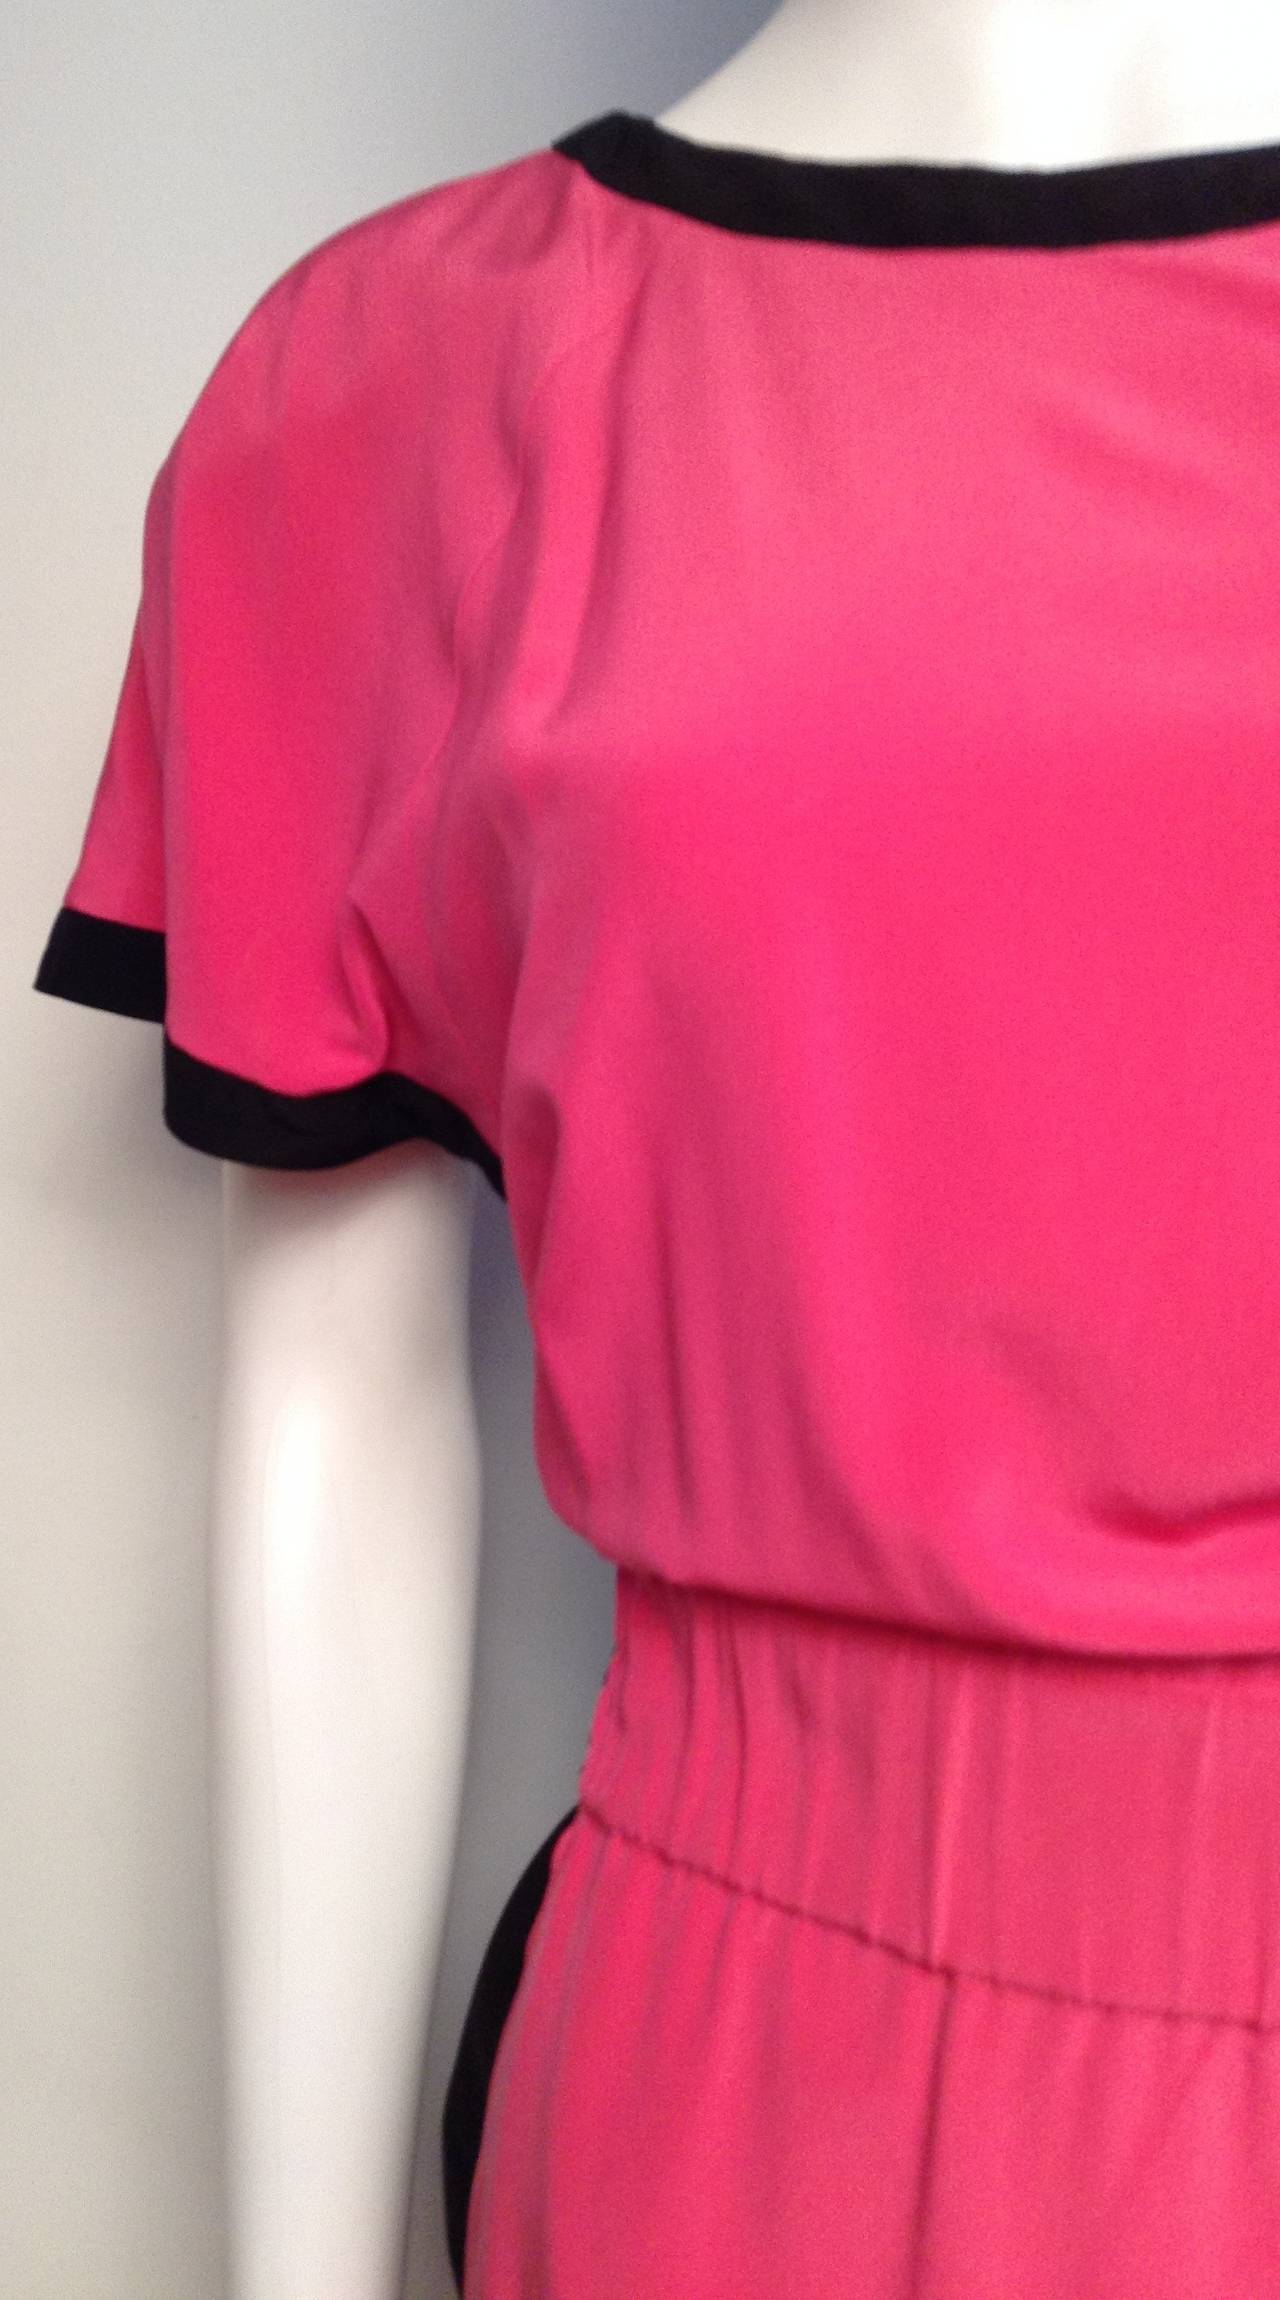 Karl Lagerfeld Black and Pink Vintage Dress Size 8 In Good Condition For Sale In Toronto, Ontario